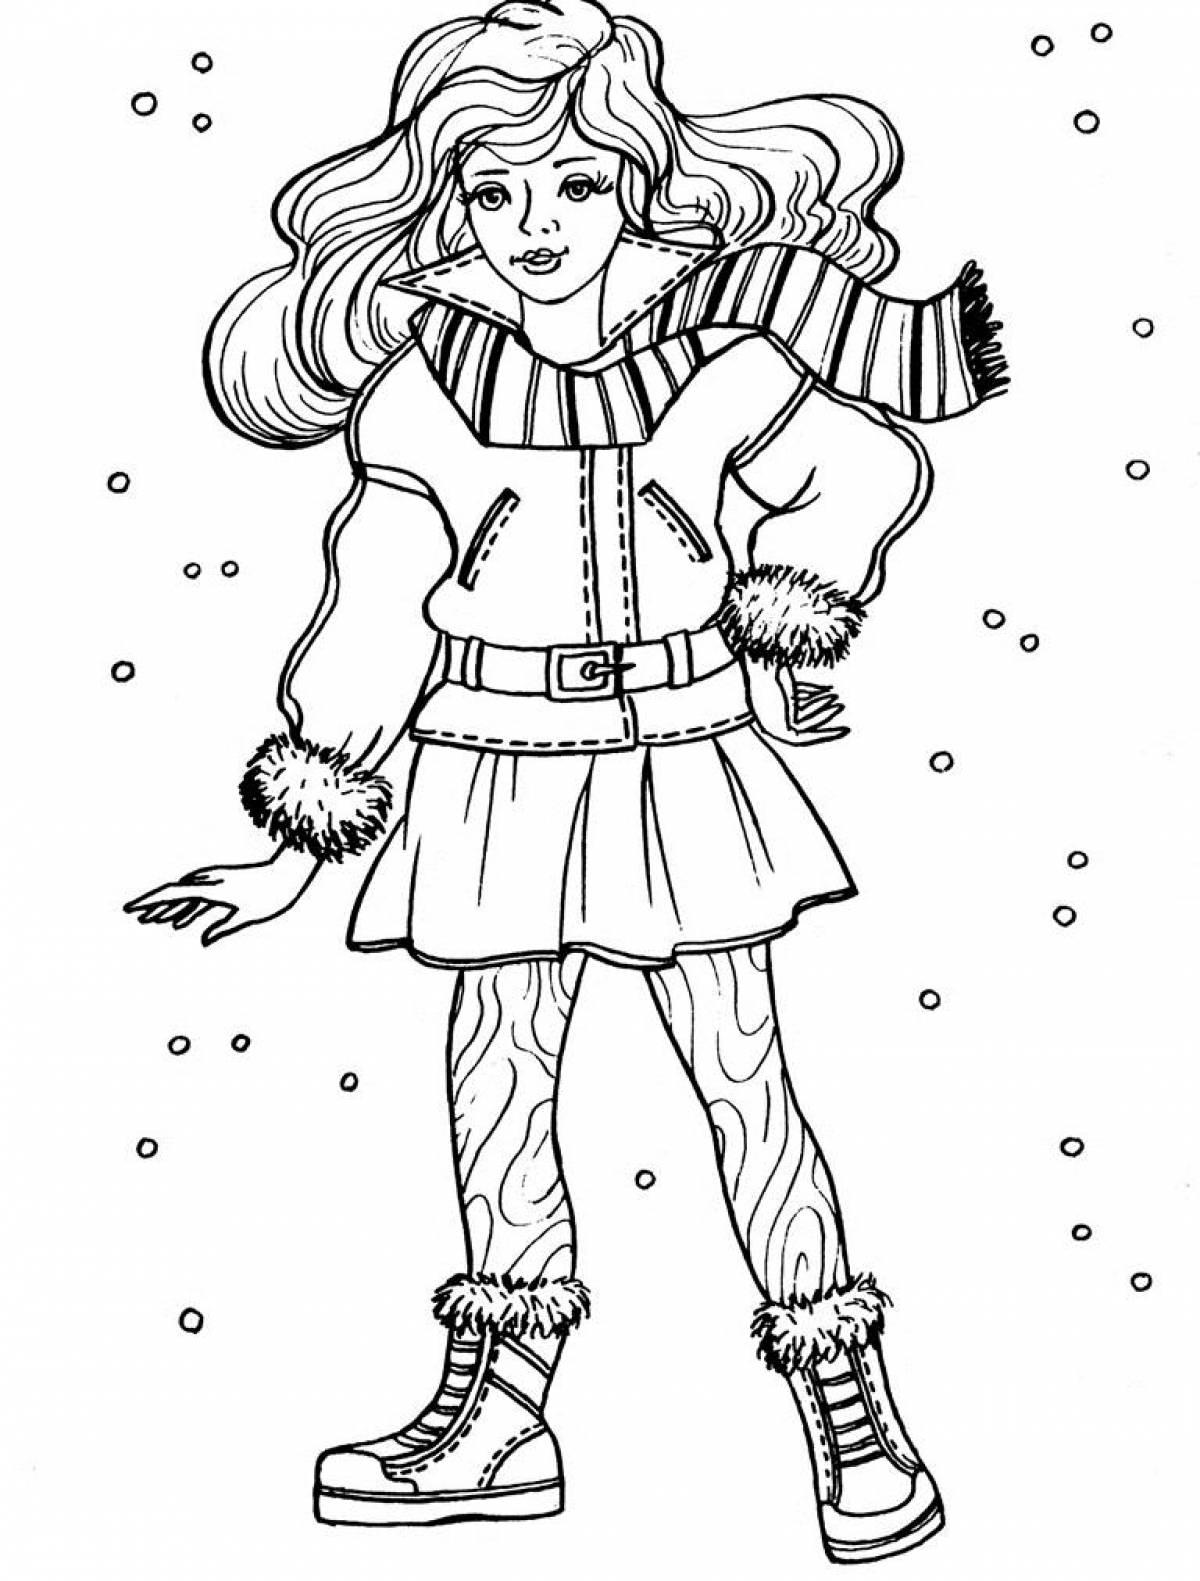 Adorable winter coloring book for girls